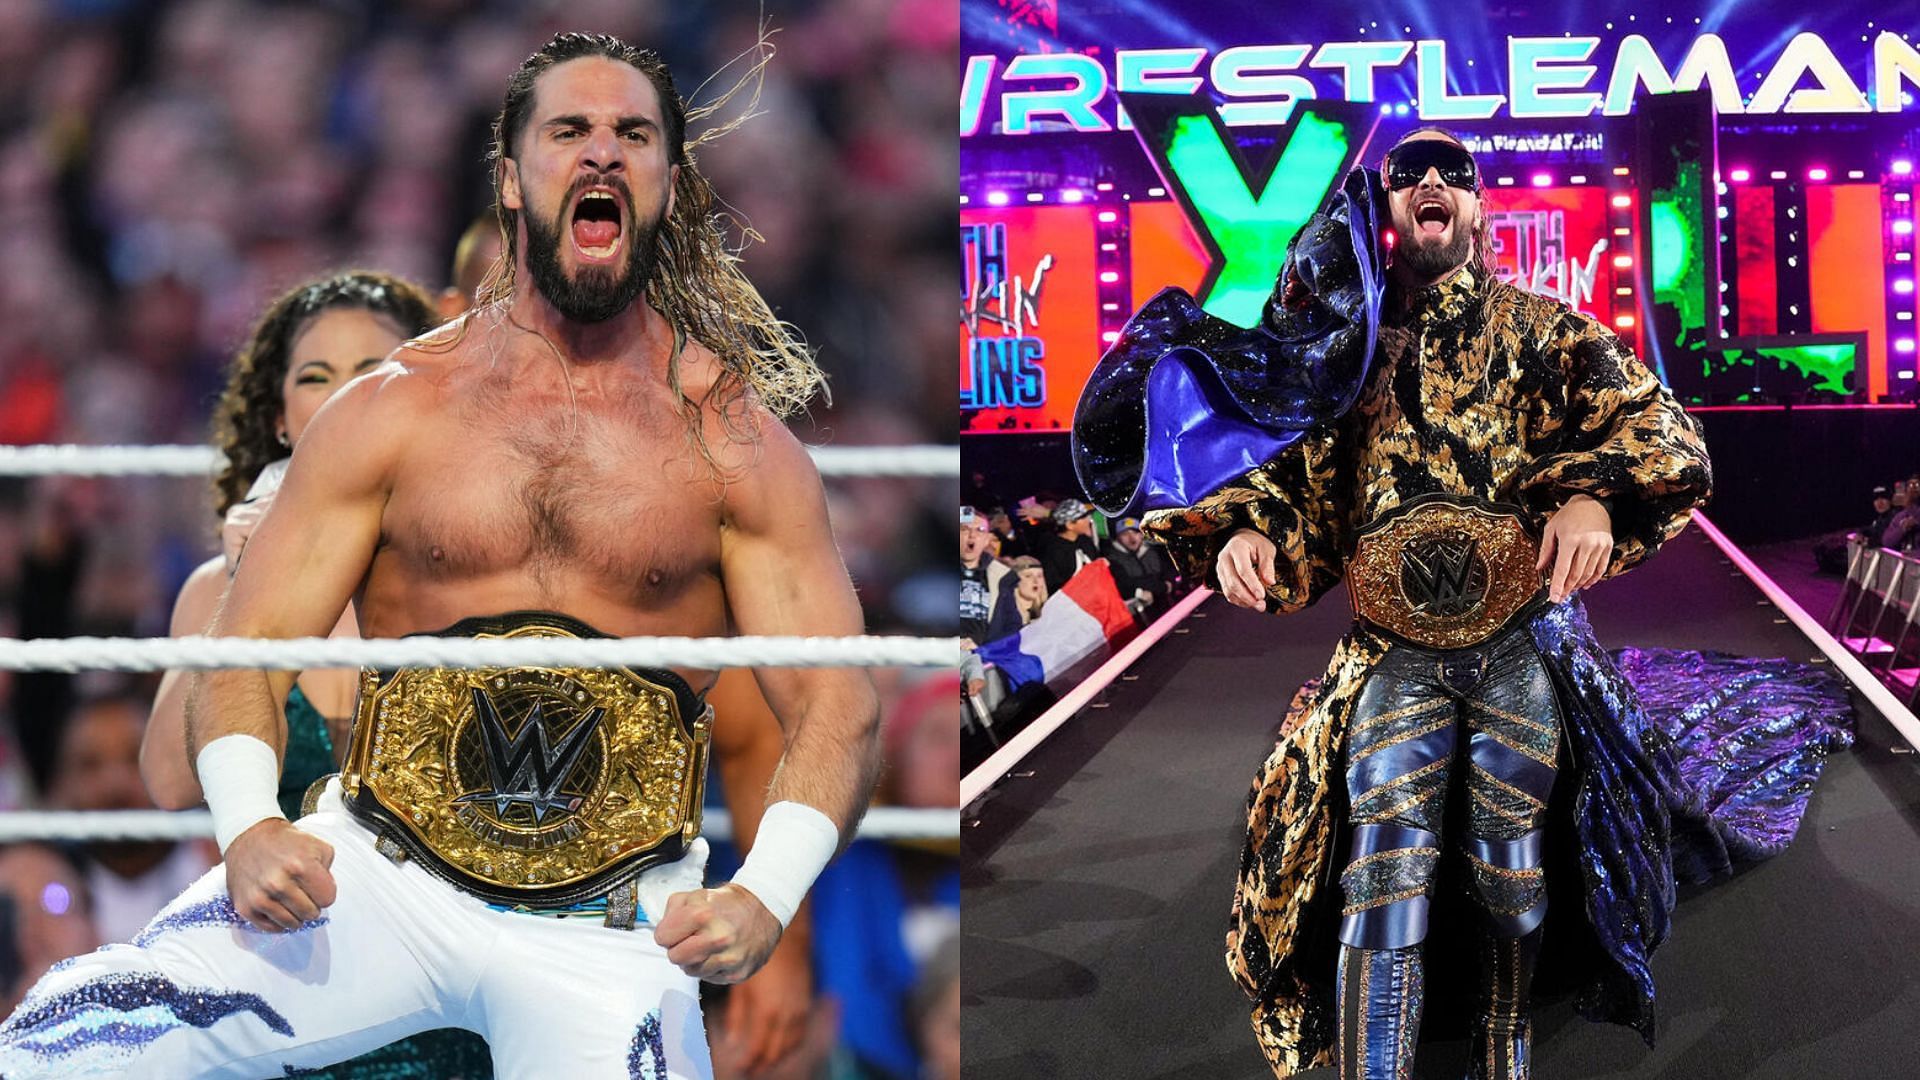 Seth Rollins at WrestleMania XL on Night 1 and 2!